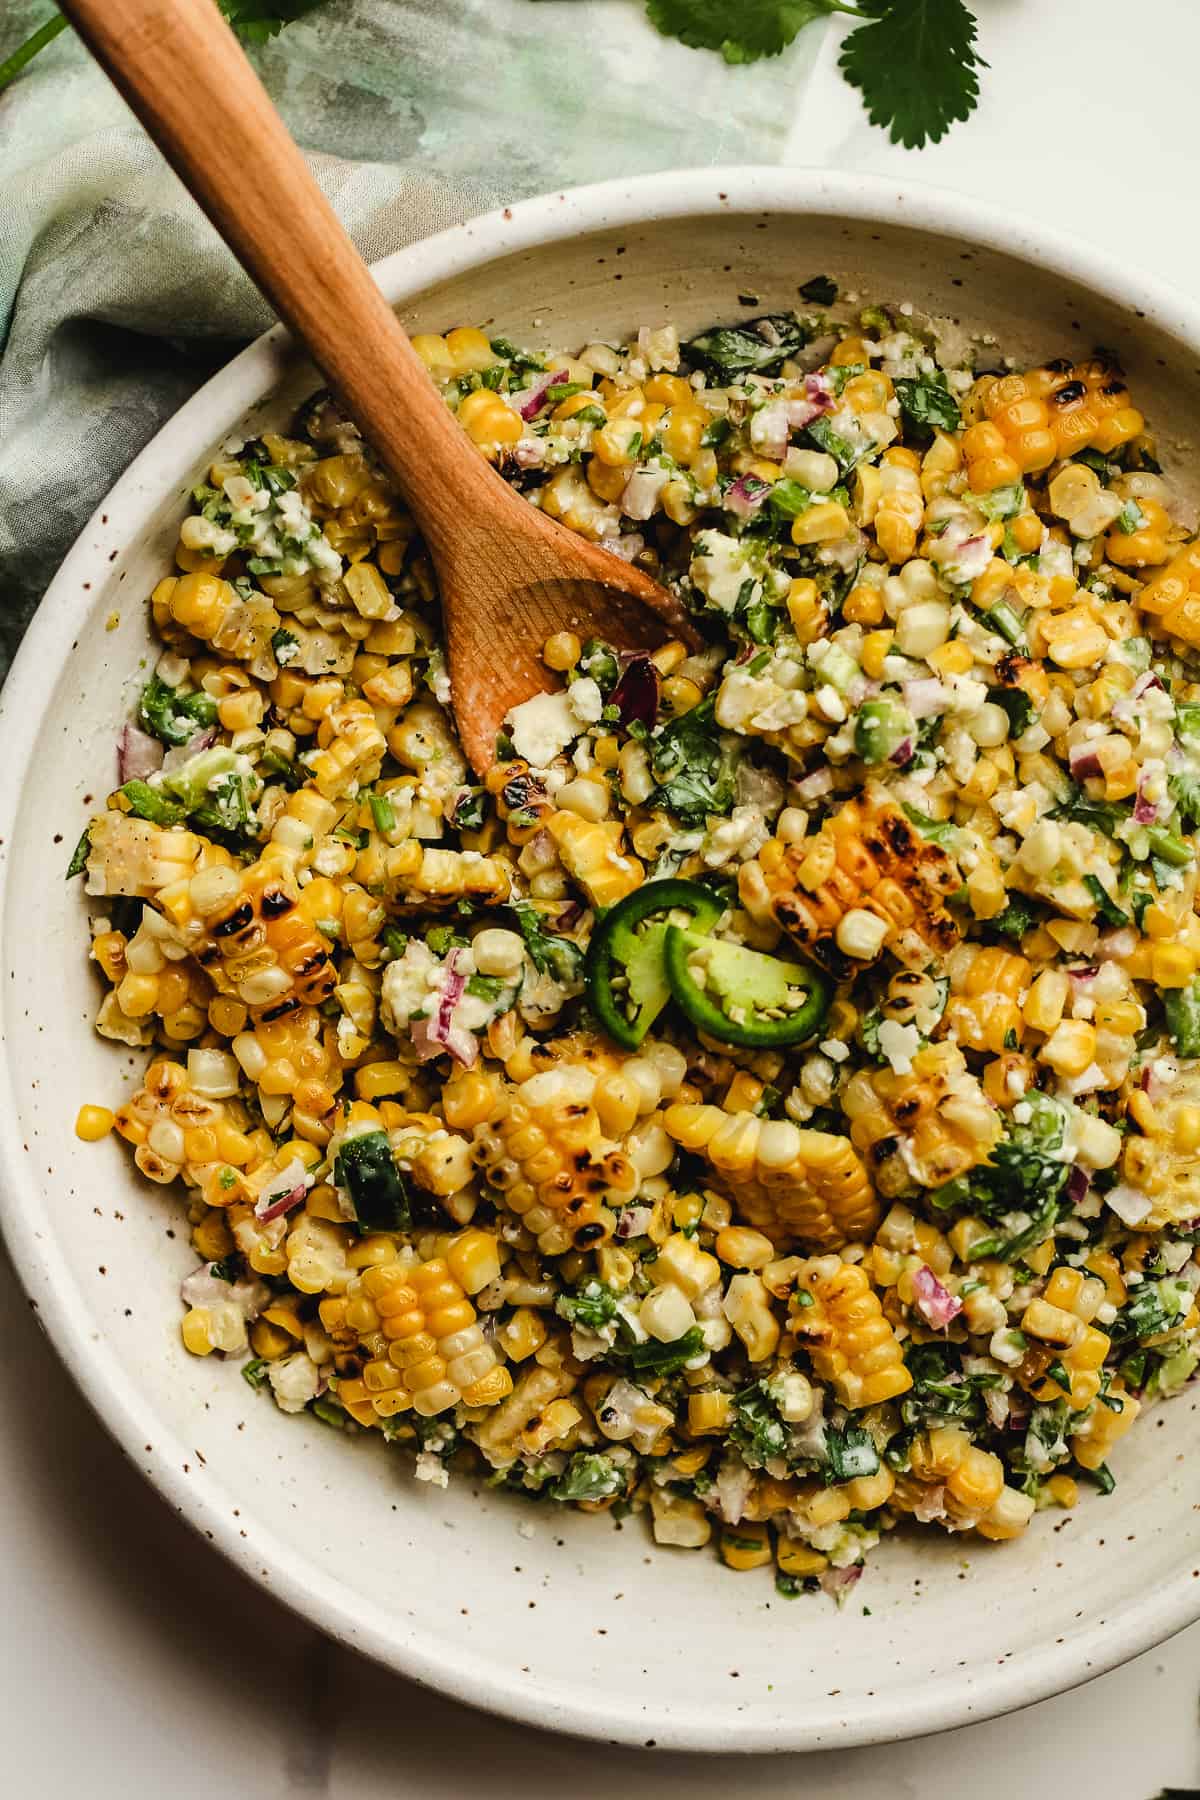 Overhead shot of a bowl of Mexican Street Corn salad, with a wooden spoon.